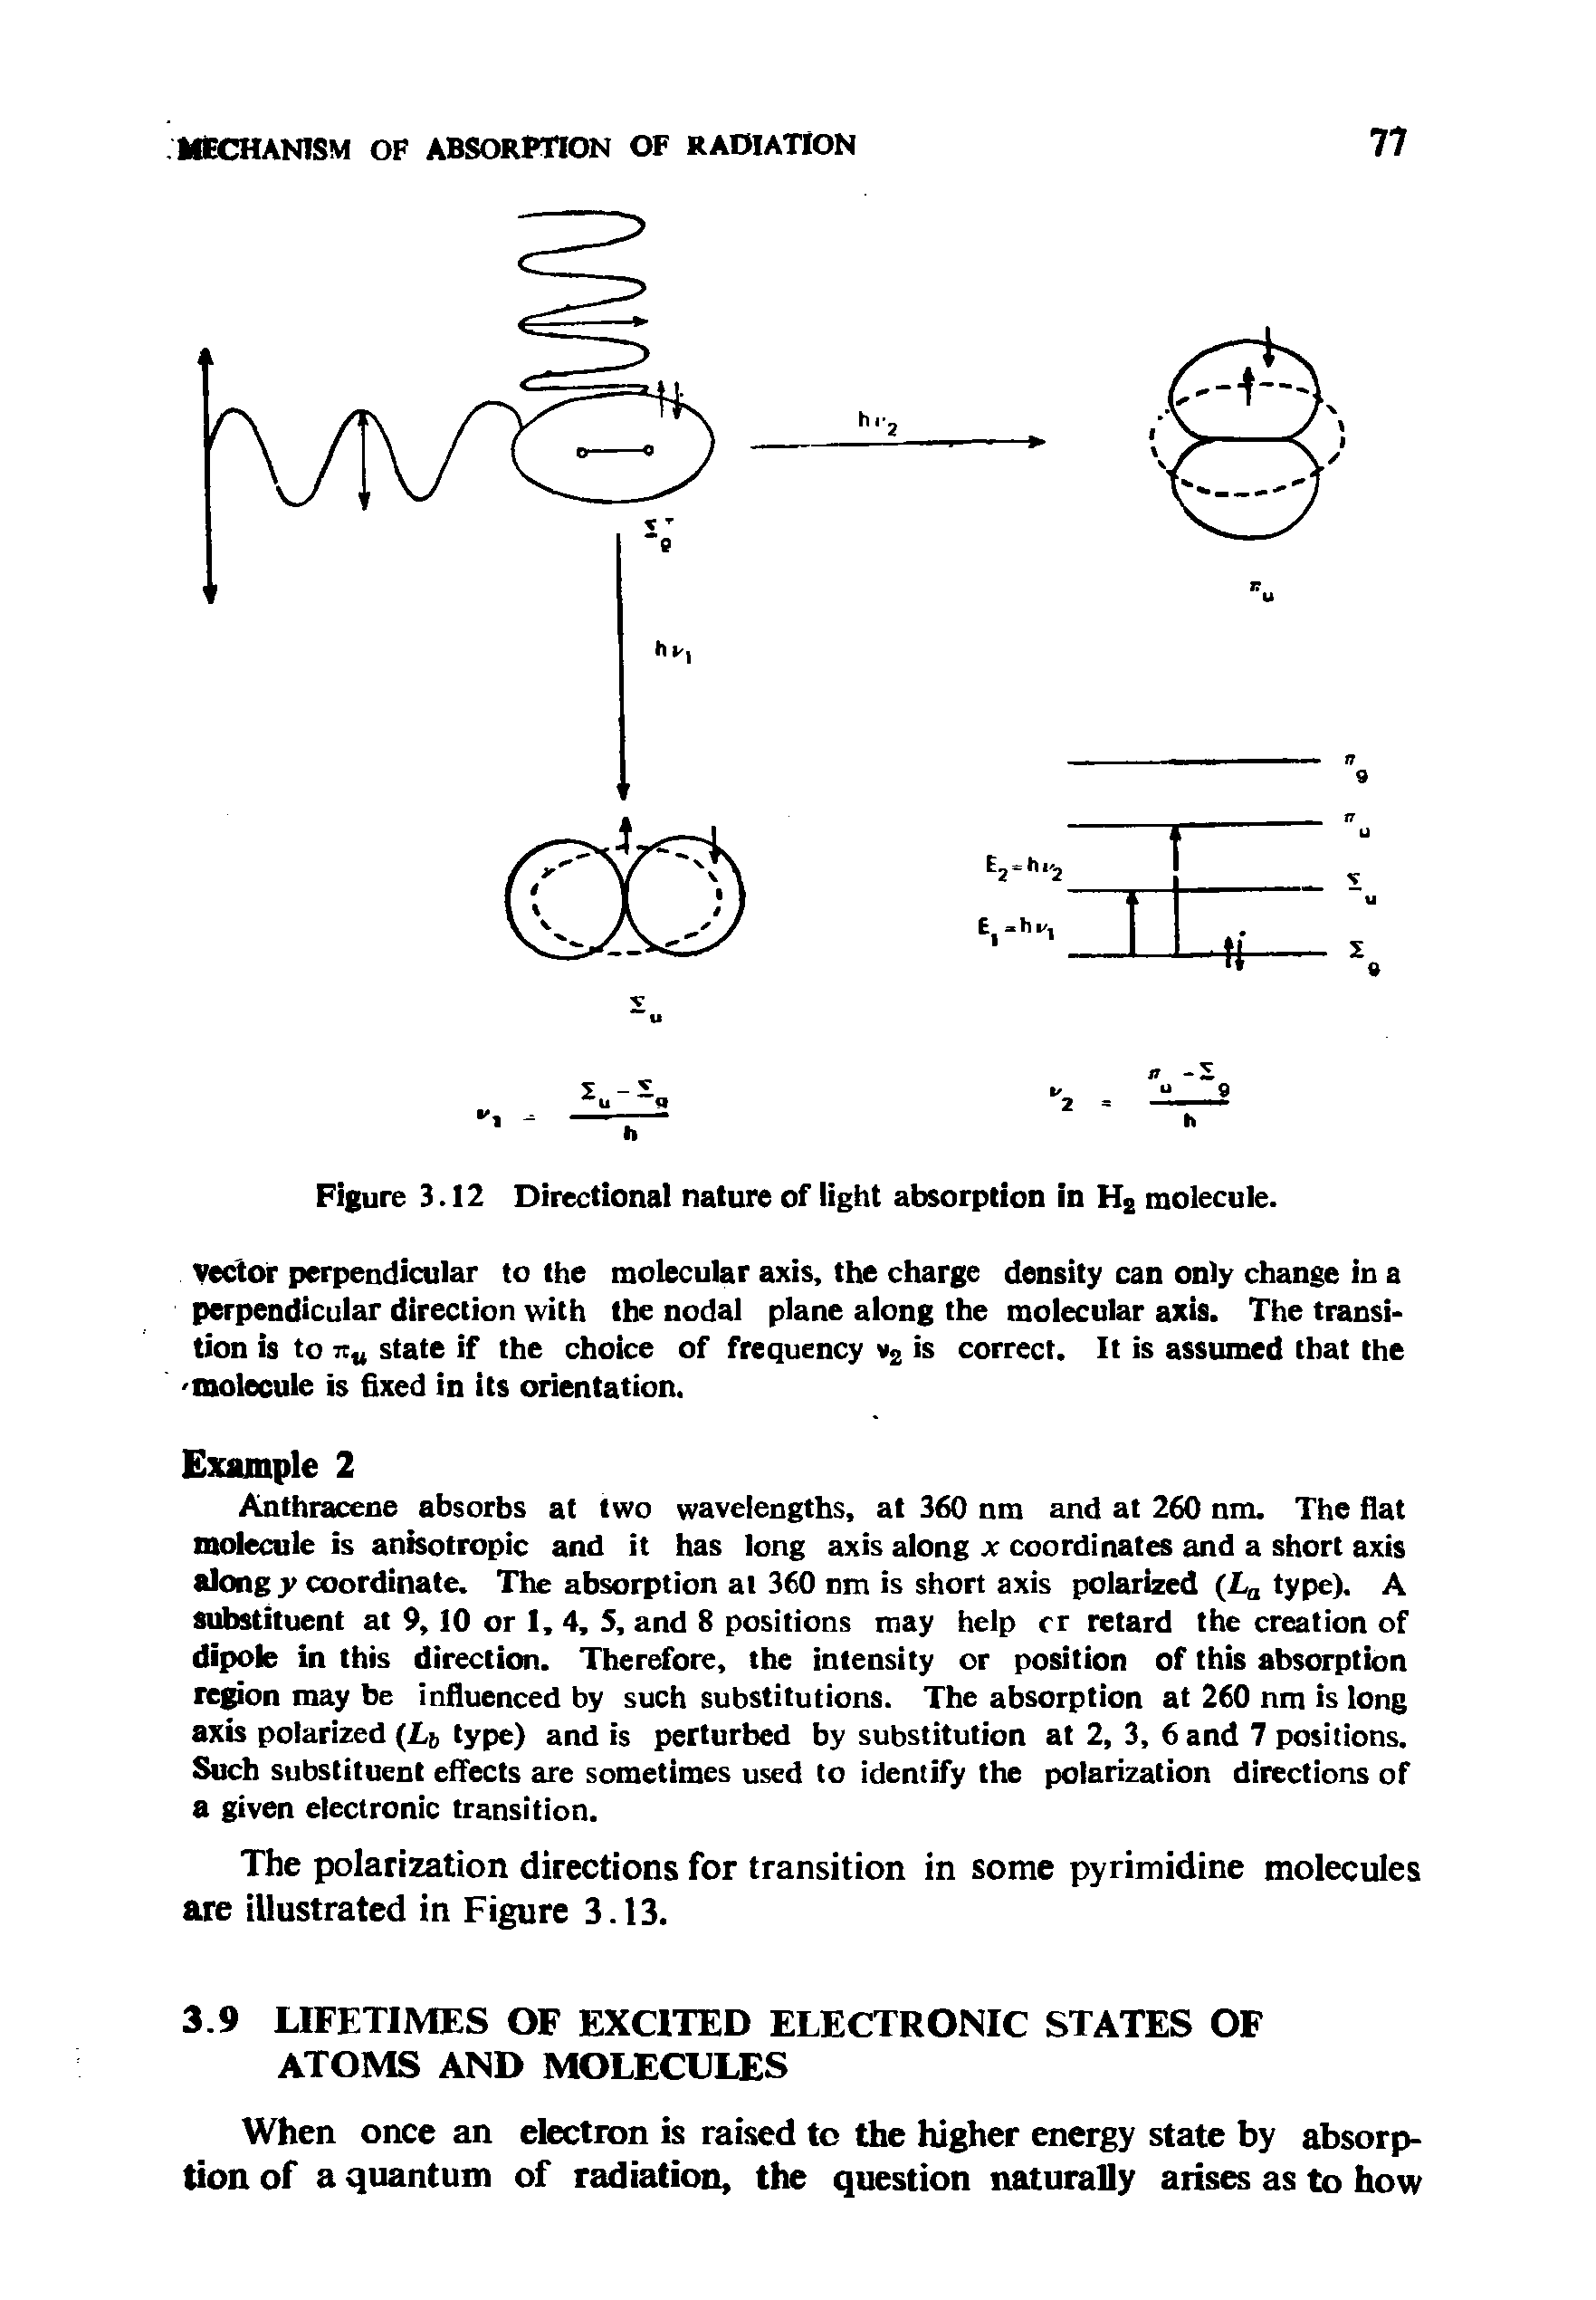 Figure 3.12 Directional nature of light absorption in H2 molecule.